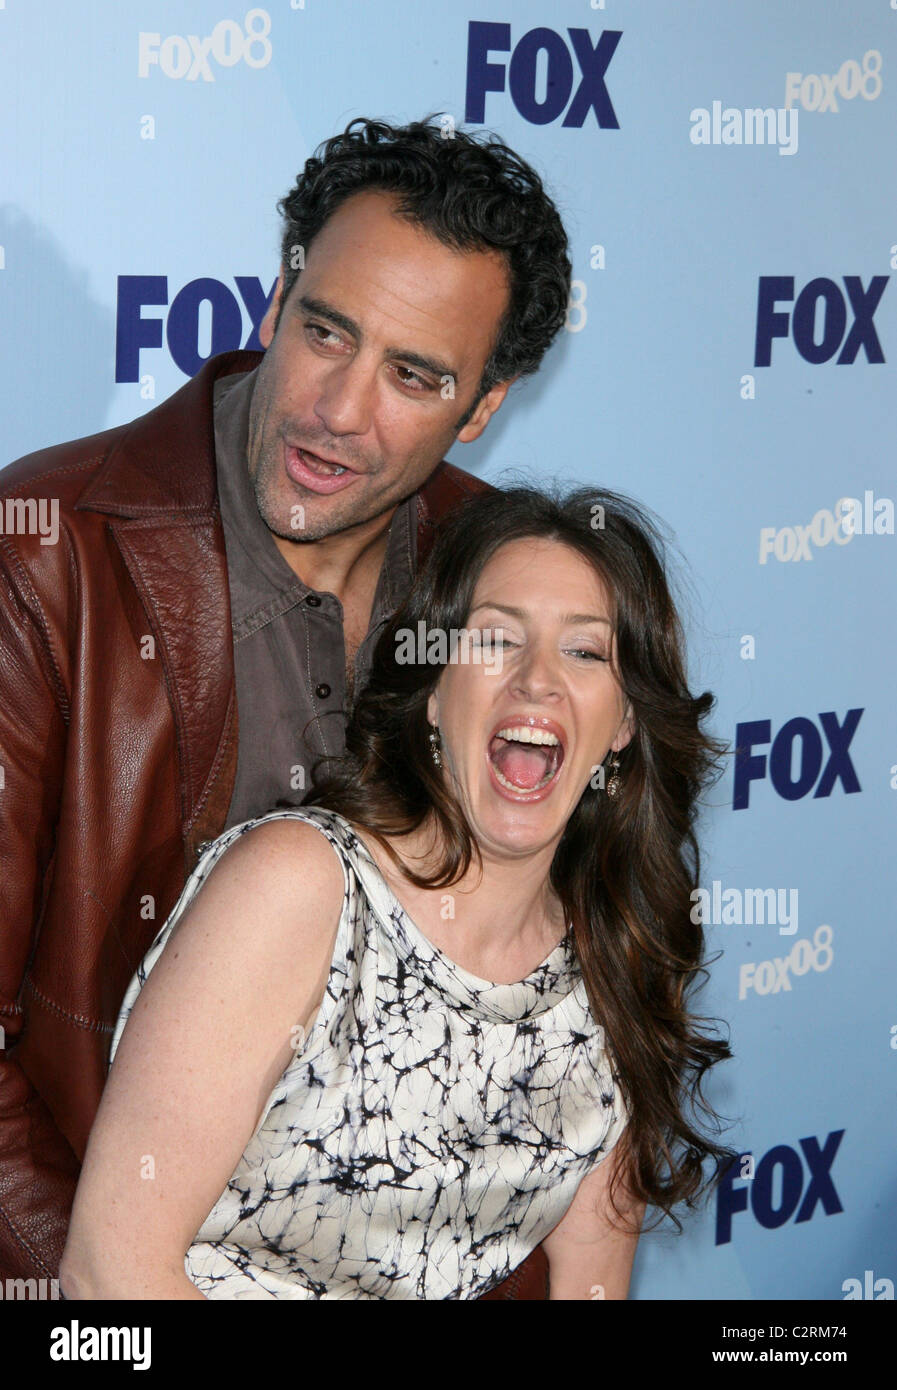 Brad Garrett and Joely Fisher 2008 FOX Upfront at Wollman Rink in Central Park - Arrivals New York City, USA - 15.05.08 PNP/ Stock Photo